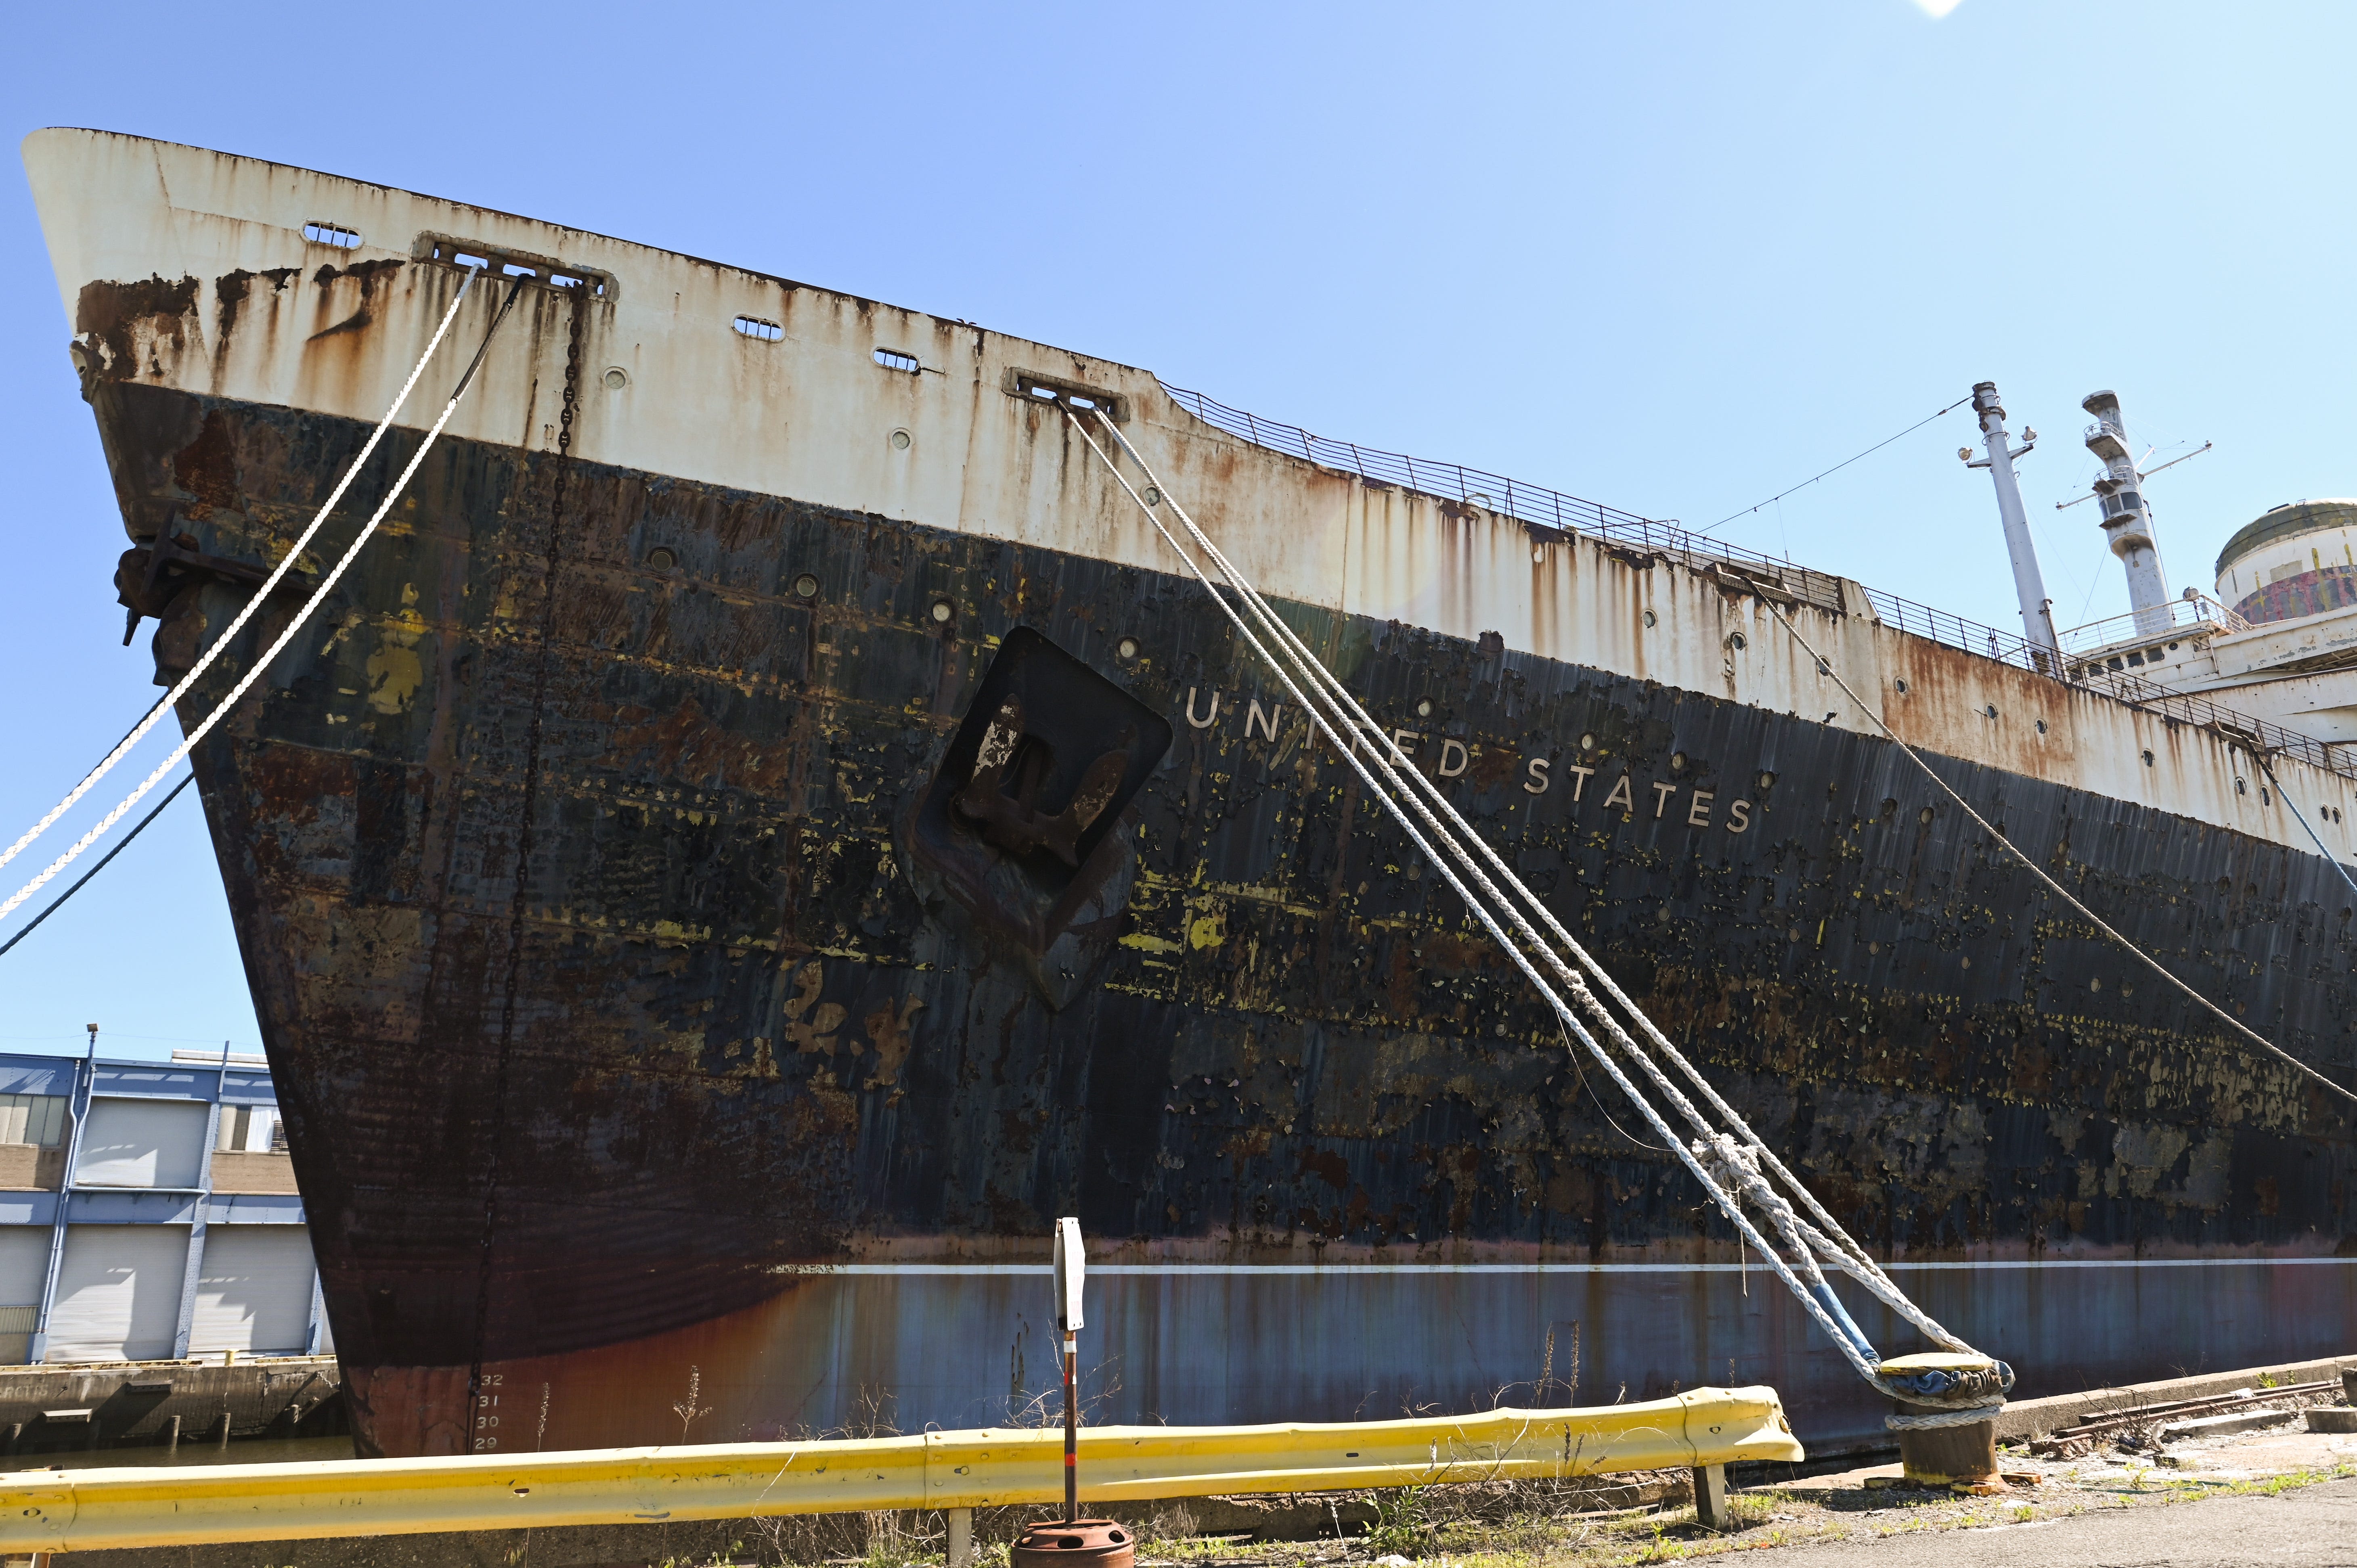 $8.6 million needed to sink SS United States in Gulf. Why some say it's worth the money.